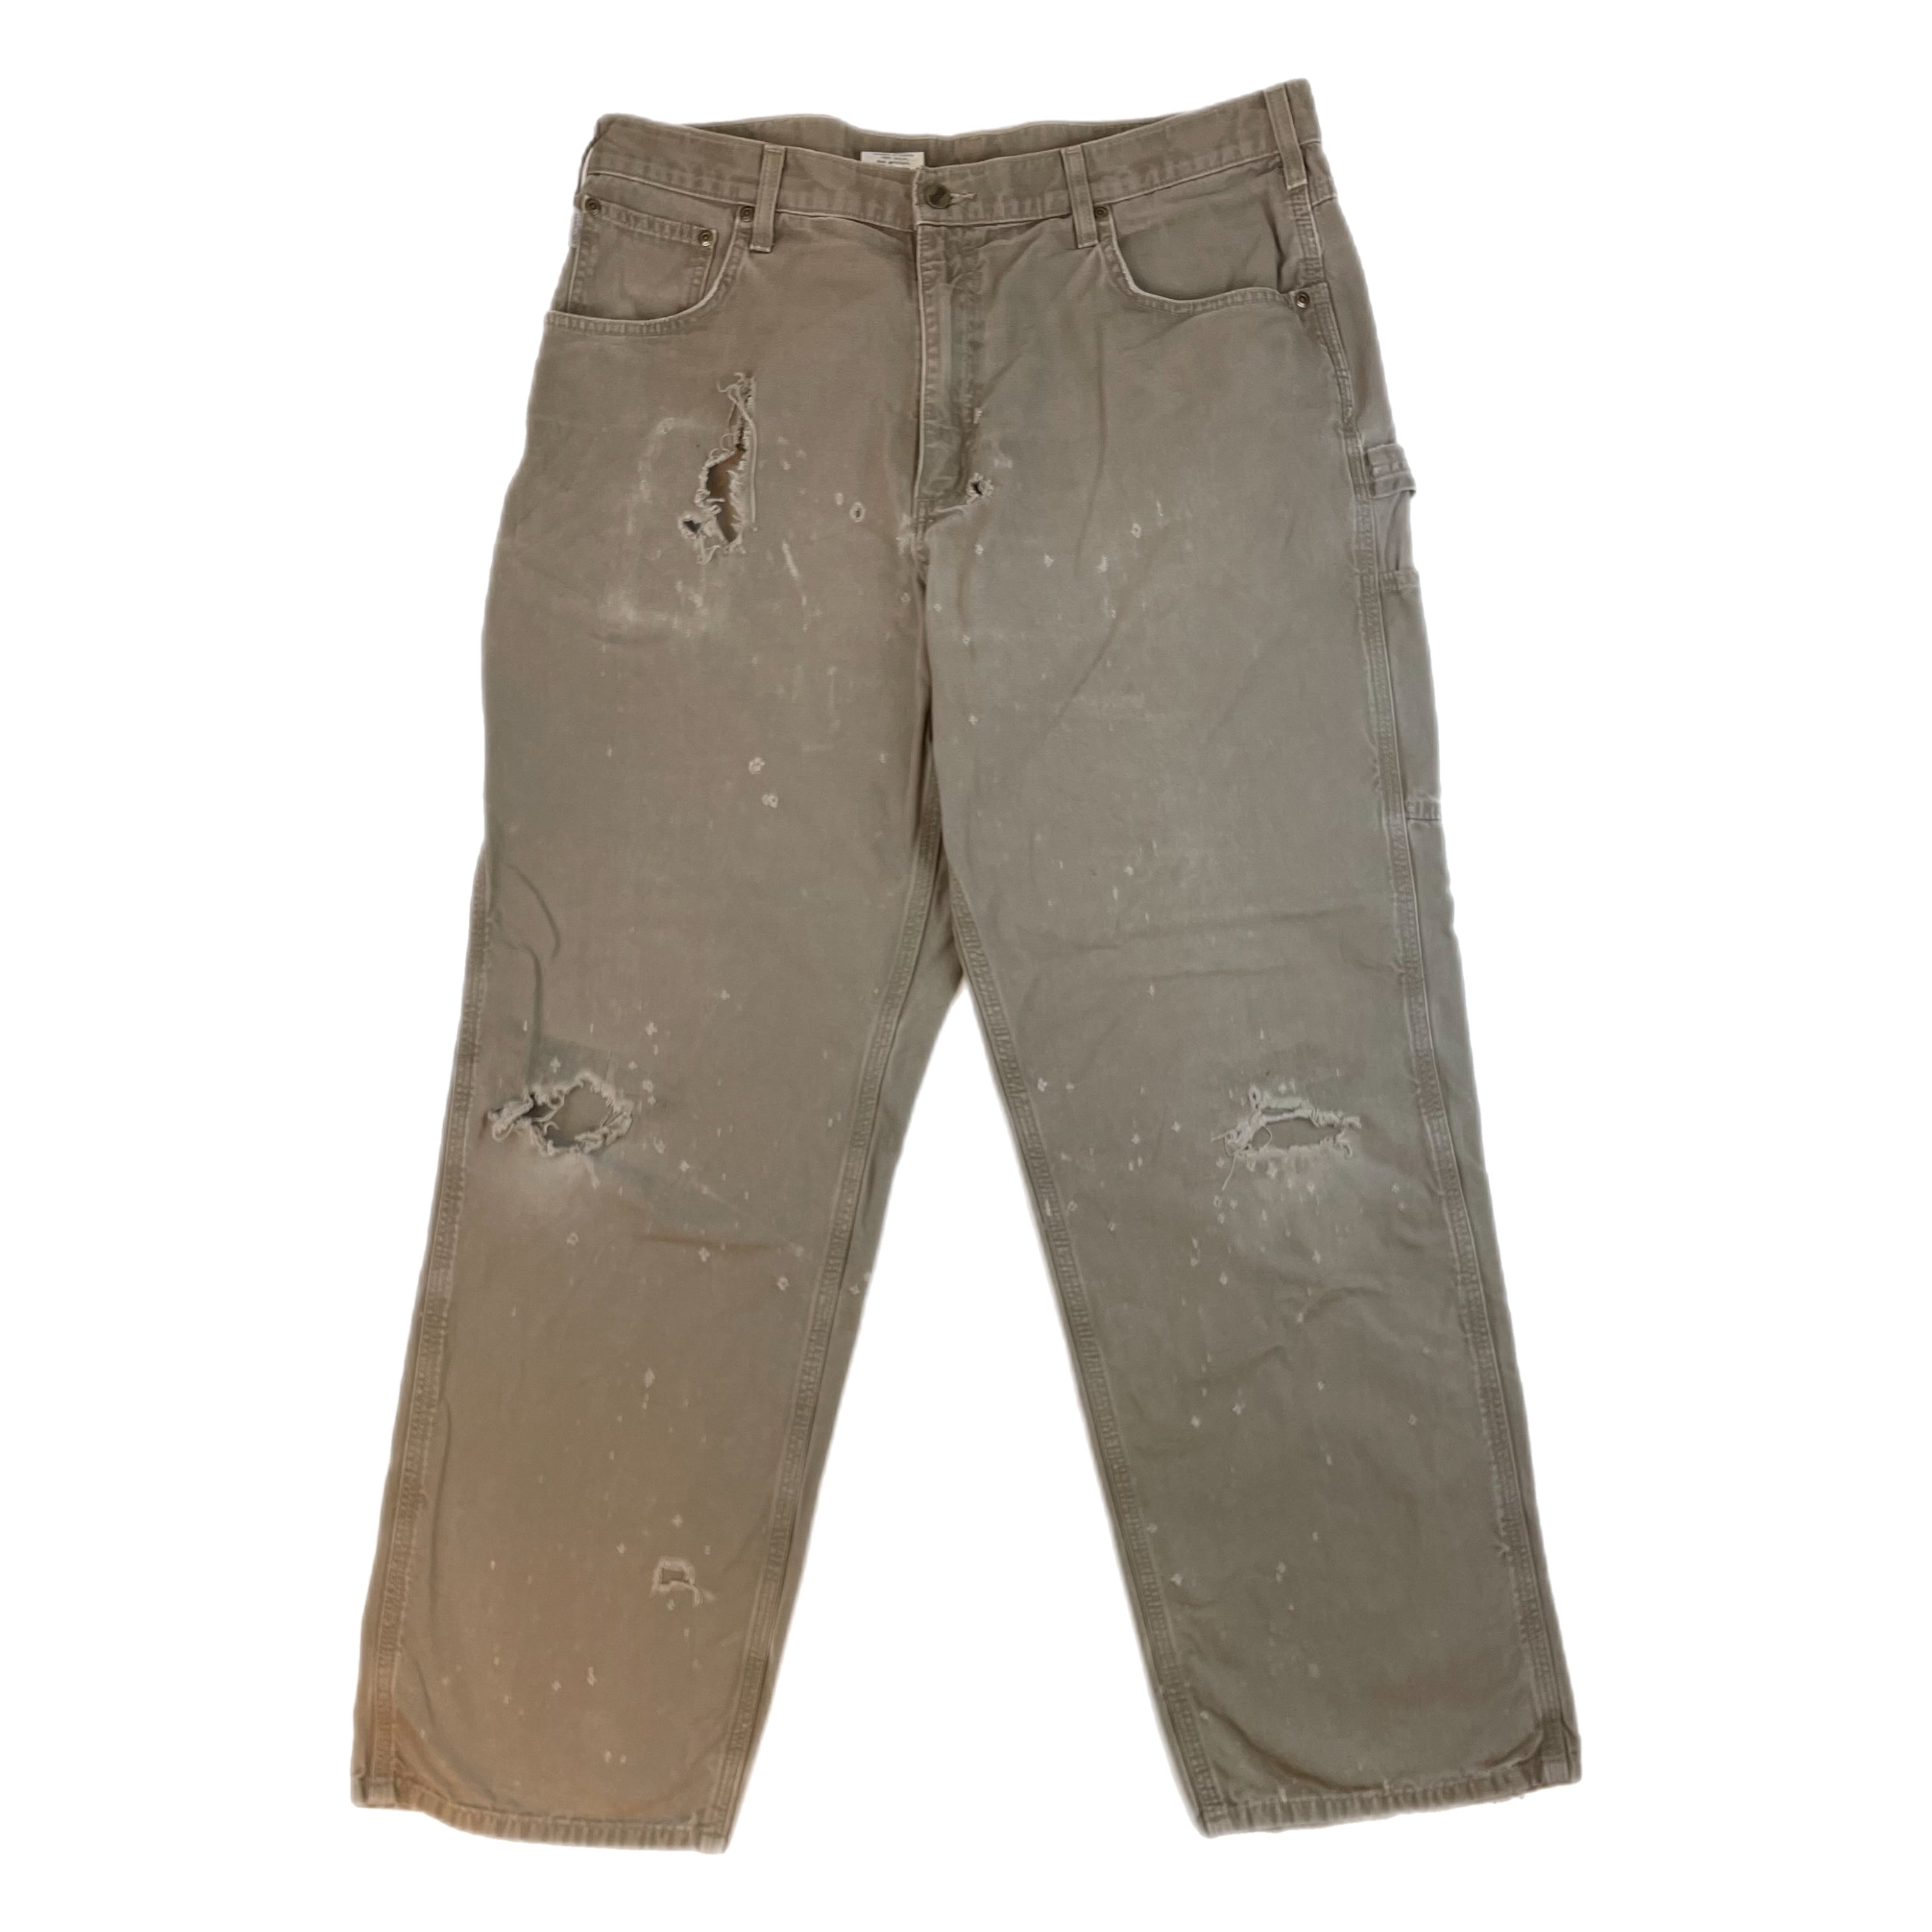 Vintage Carhartt Chino Pants Taupe